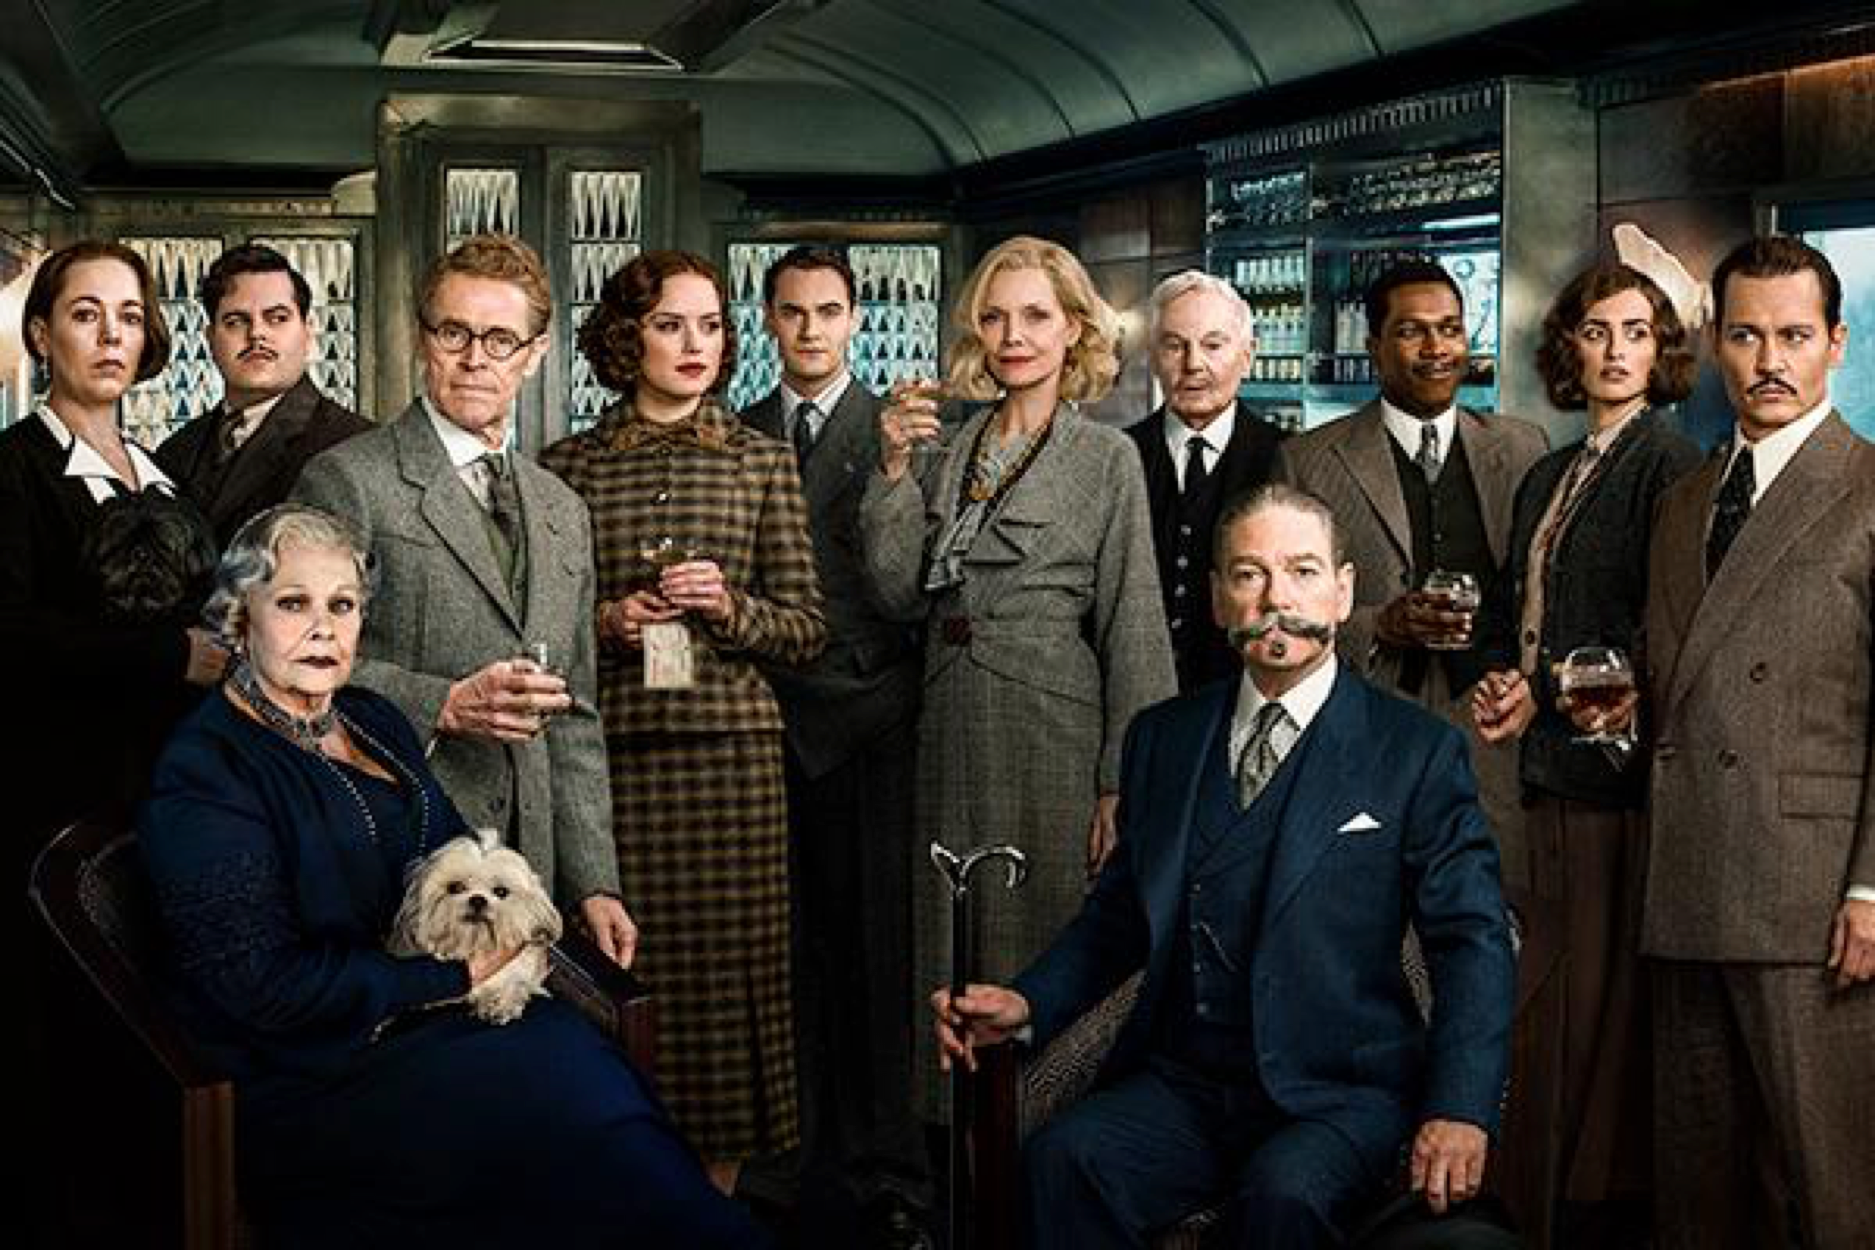 Murder on the Orient Express group